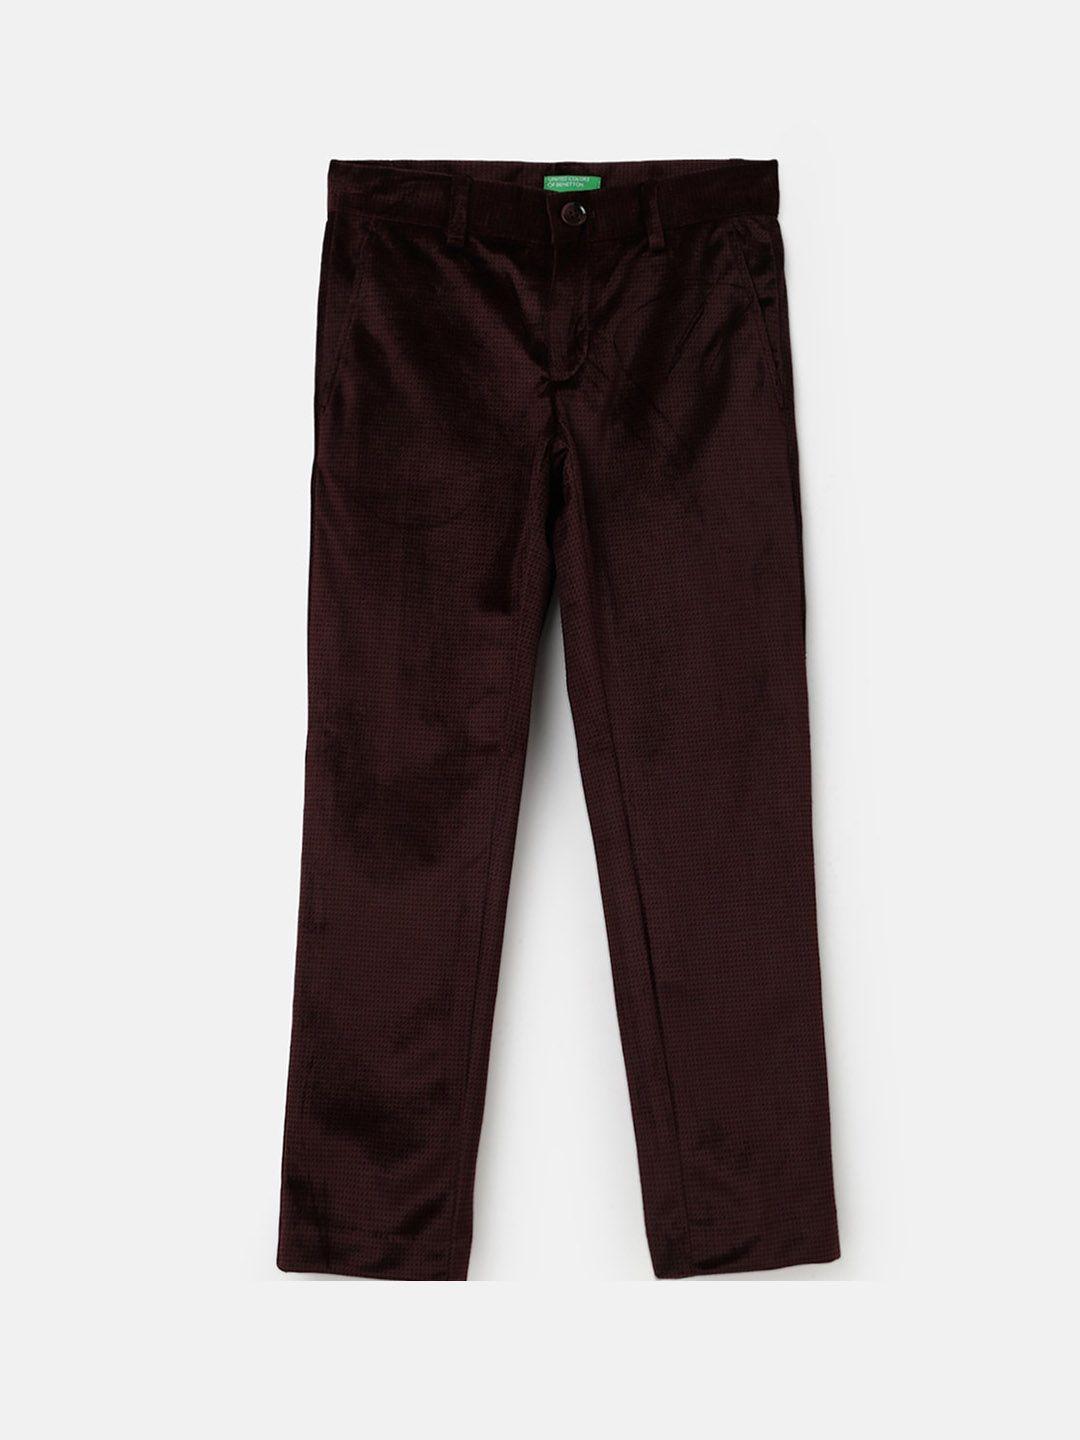 united colors of benetton boys slim fit trousers